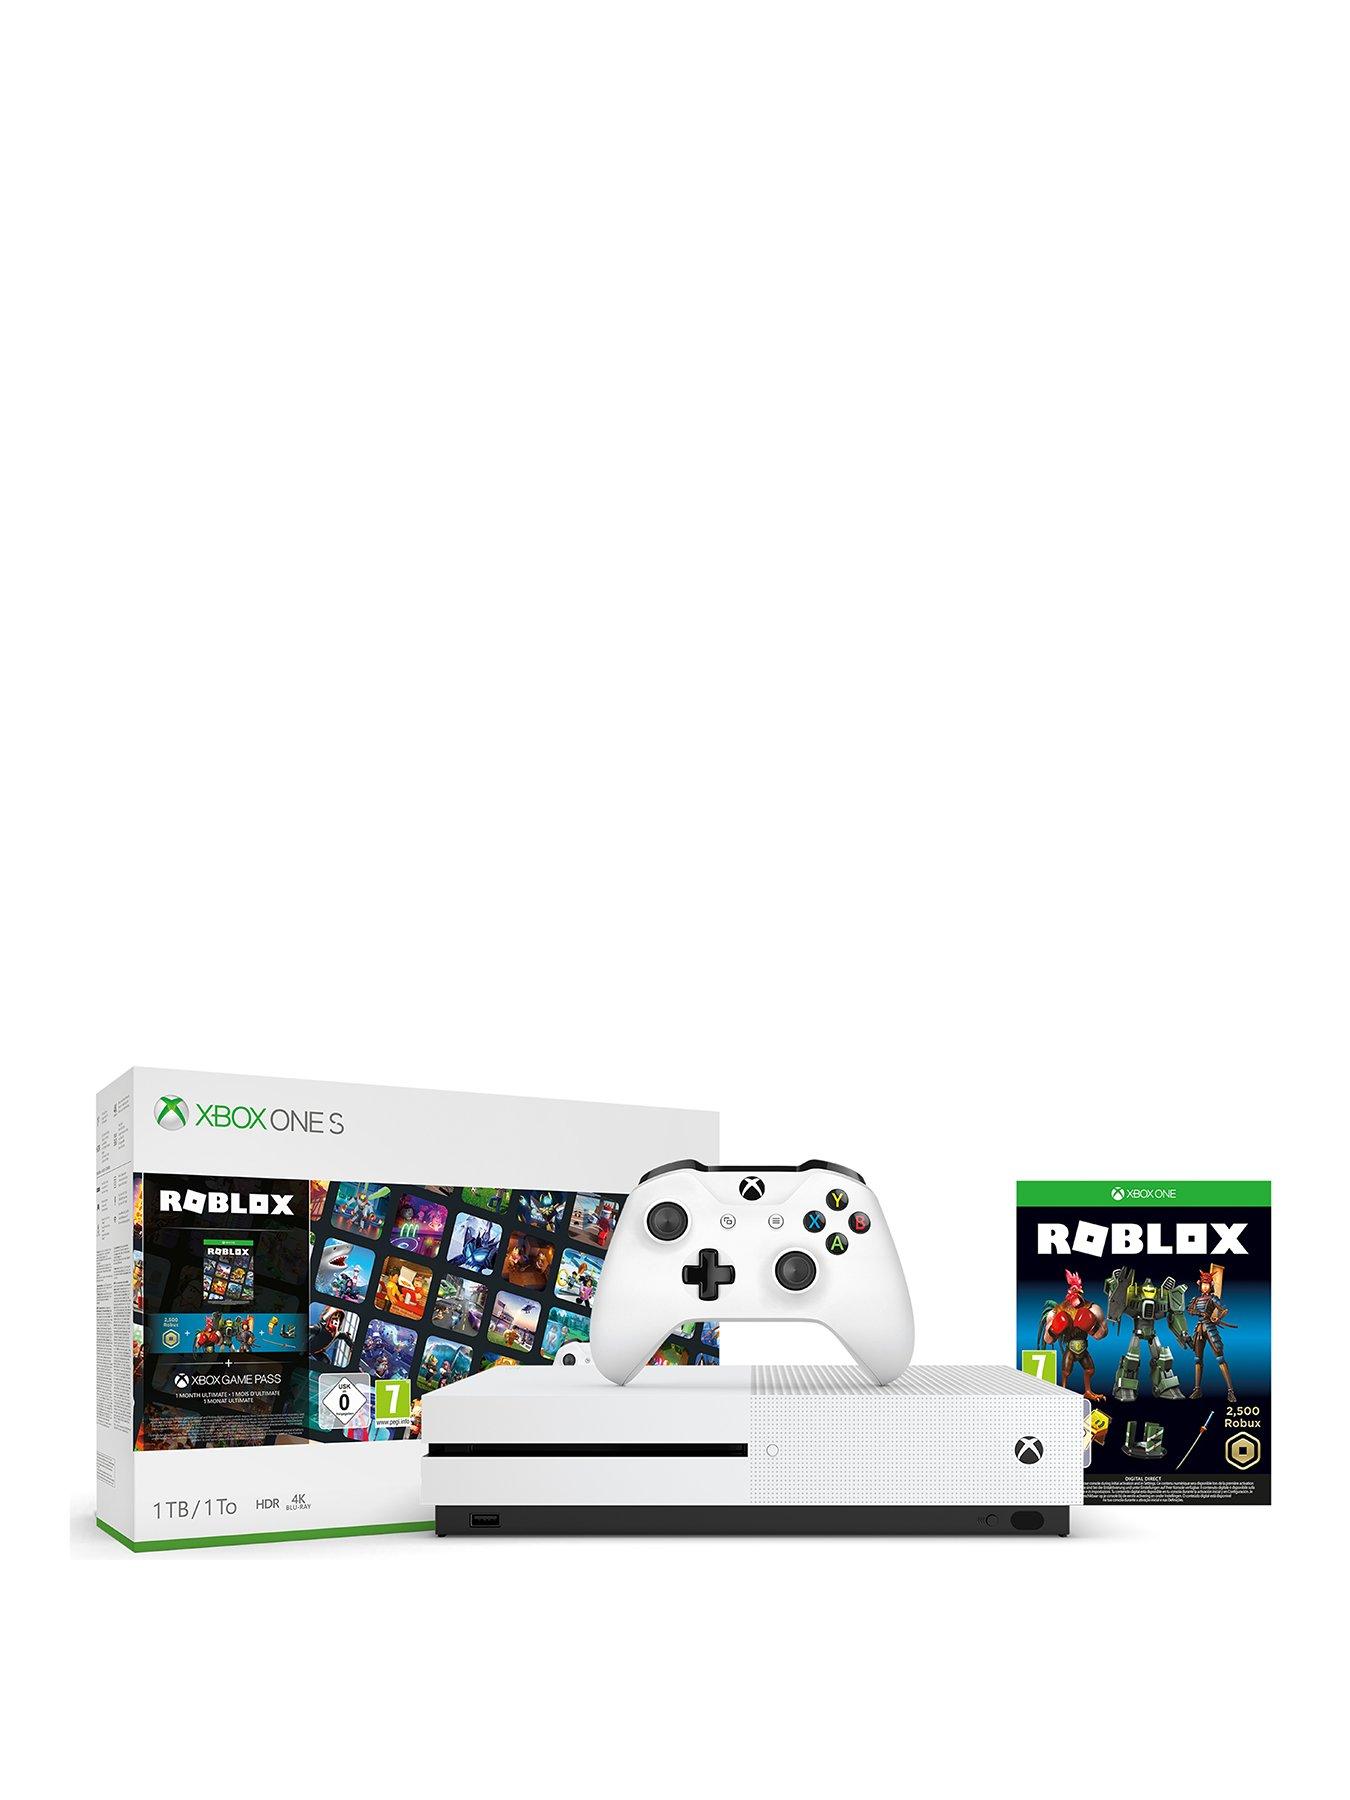 Xbox One S With Roblox Bundle And Optional Extras 1tb Console - roblox domino crown texture